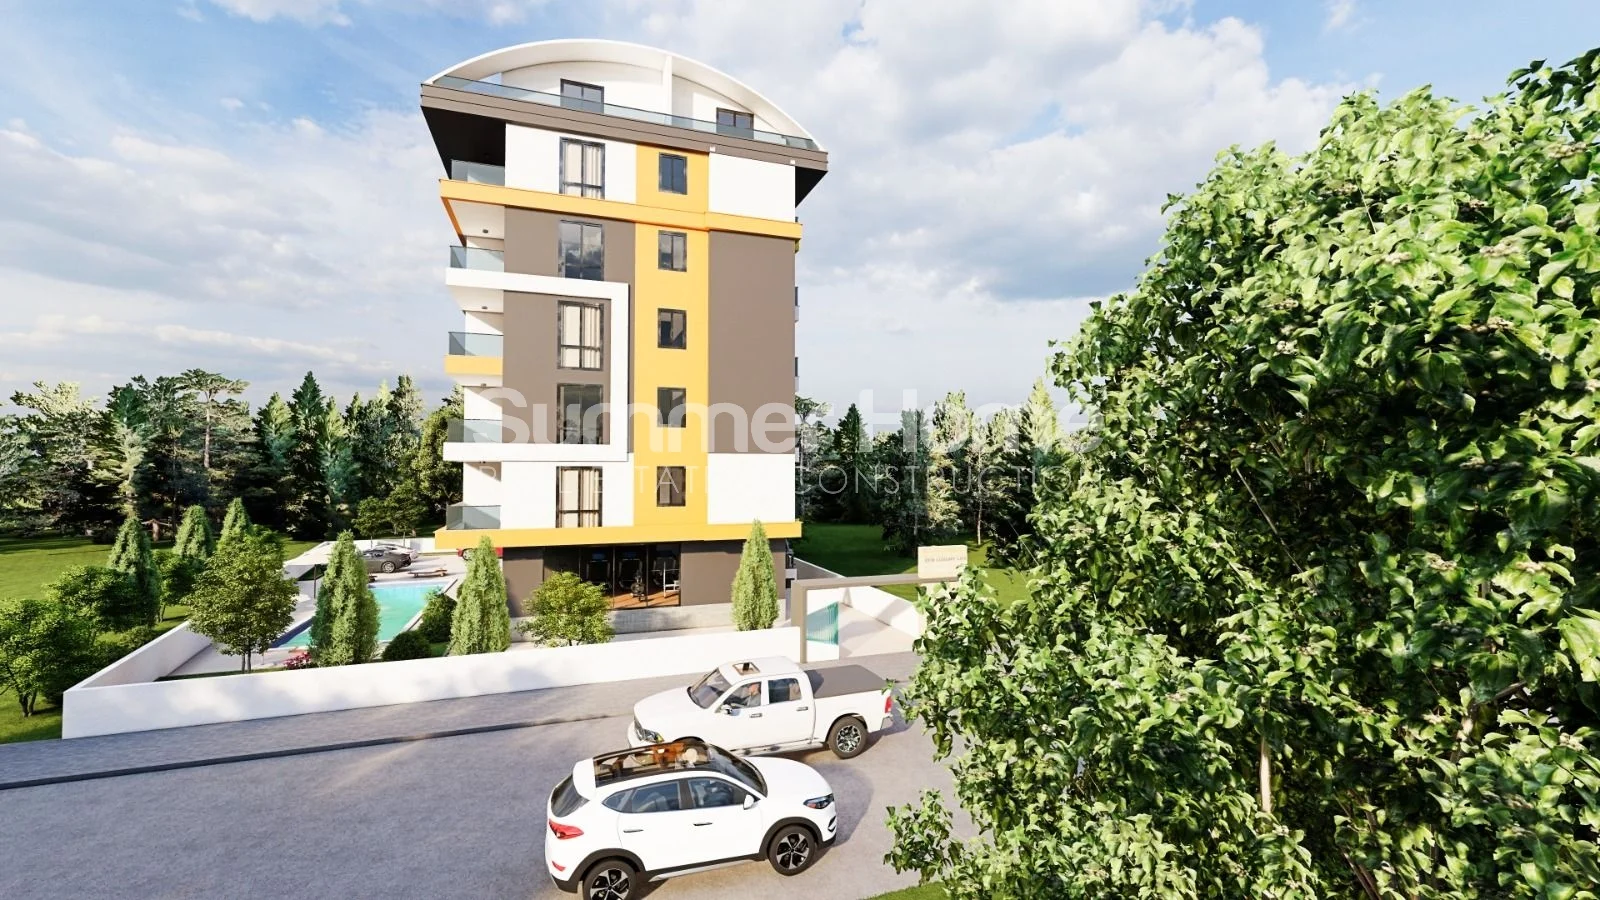 Serene Apartments Located in a Peaceful area of Ciplakli general - 4